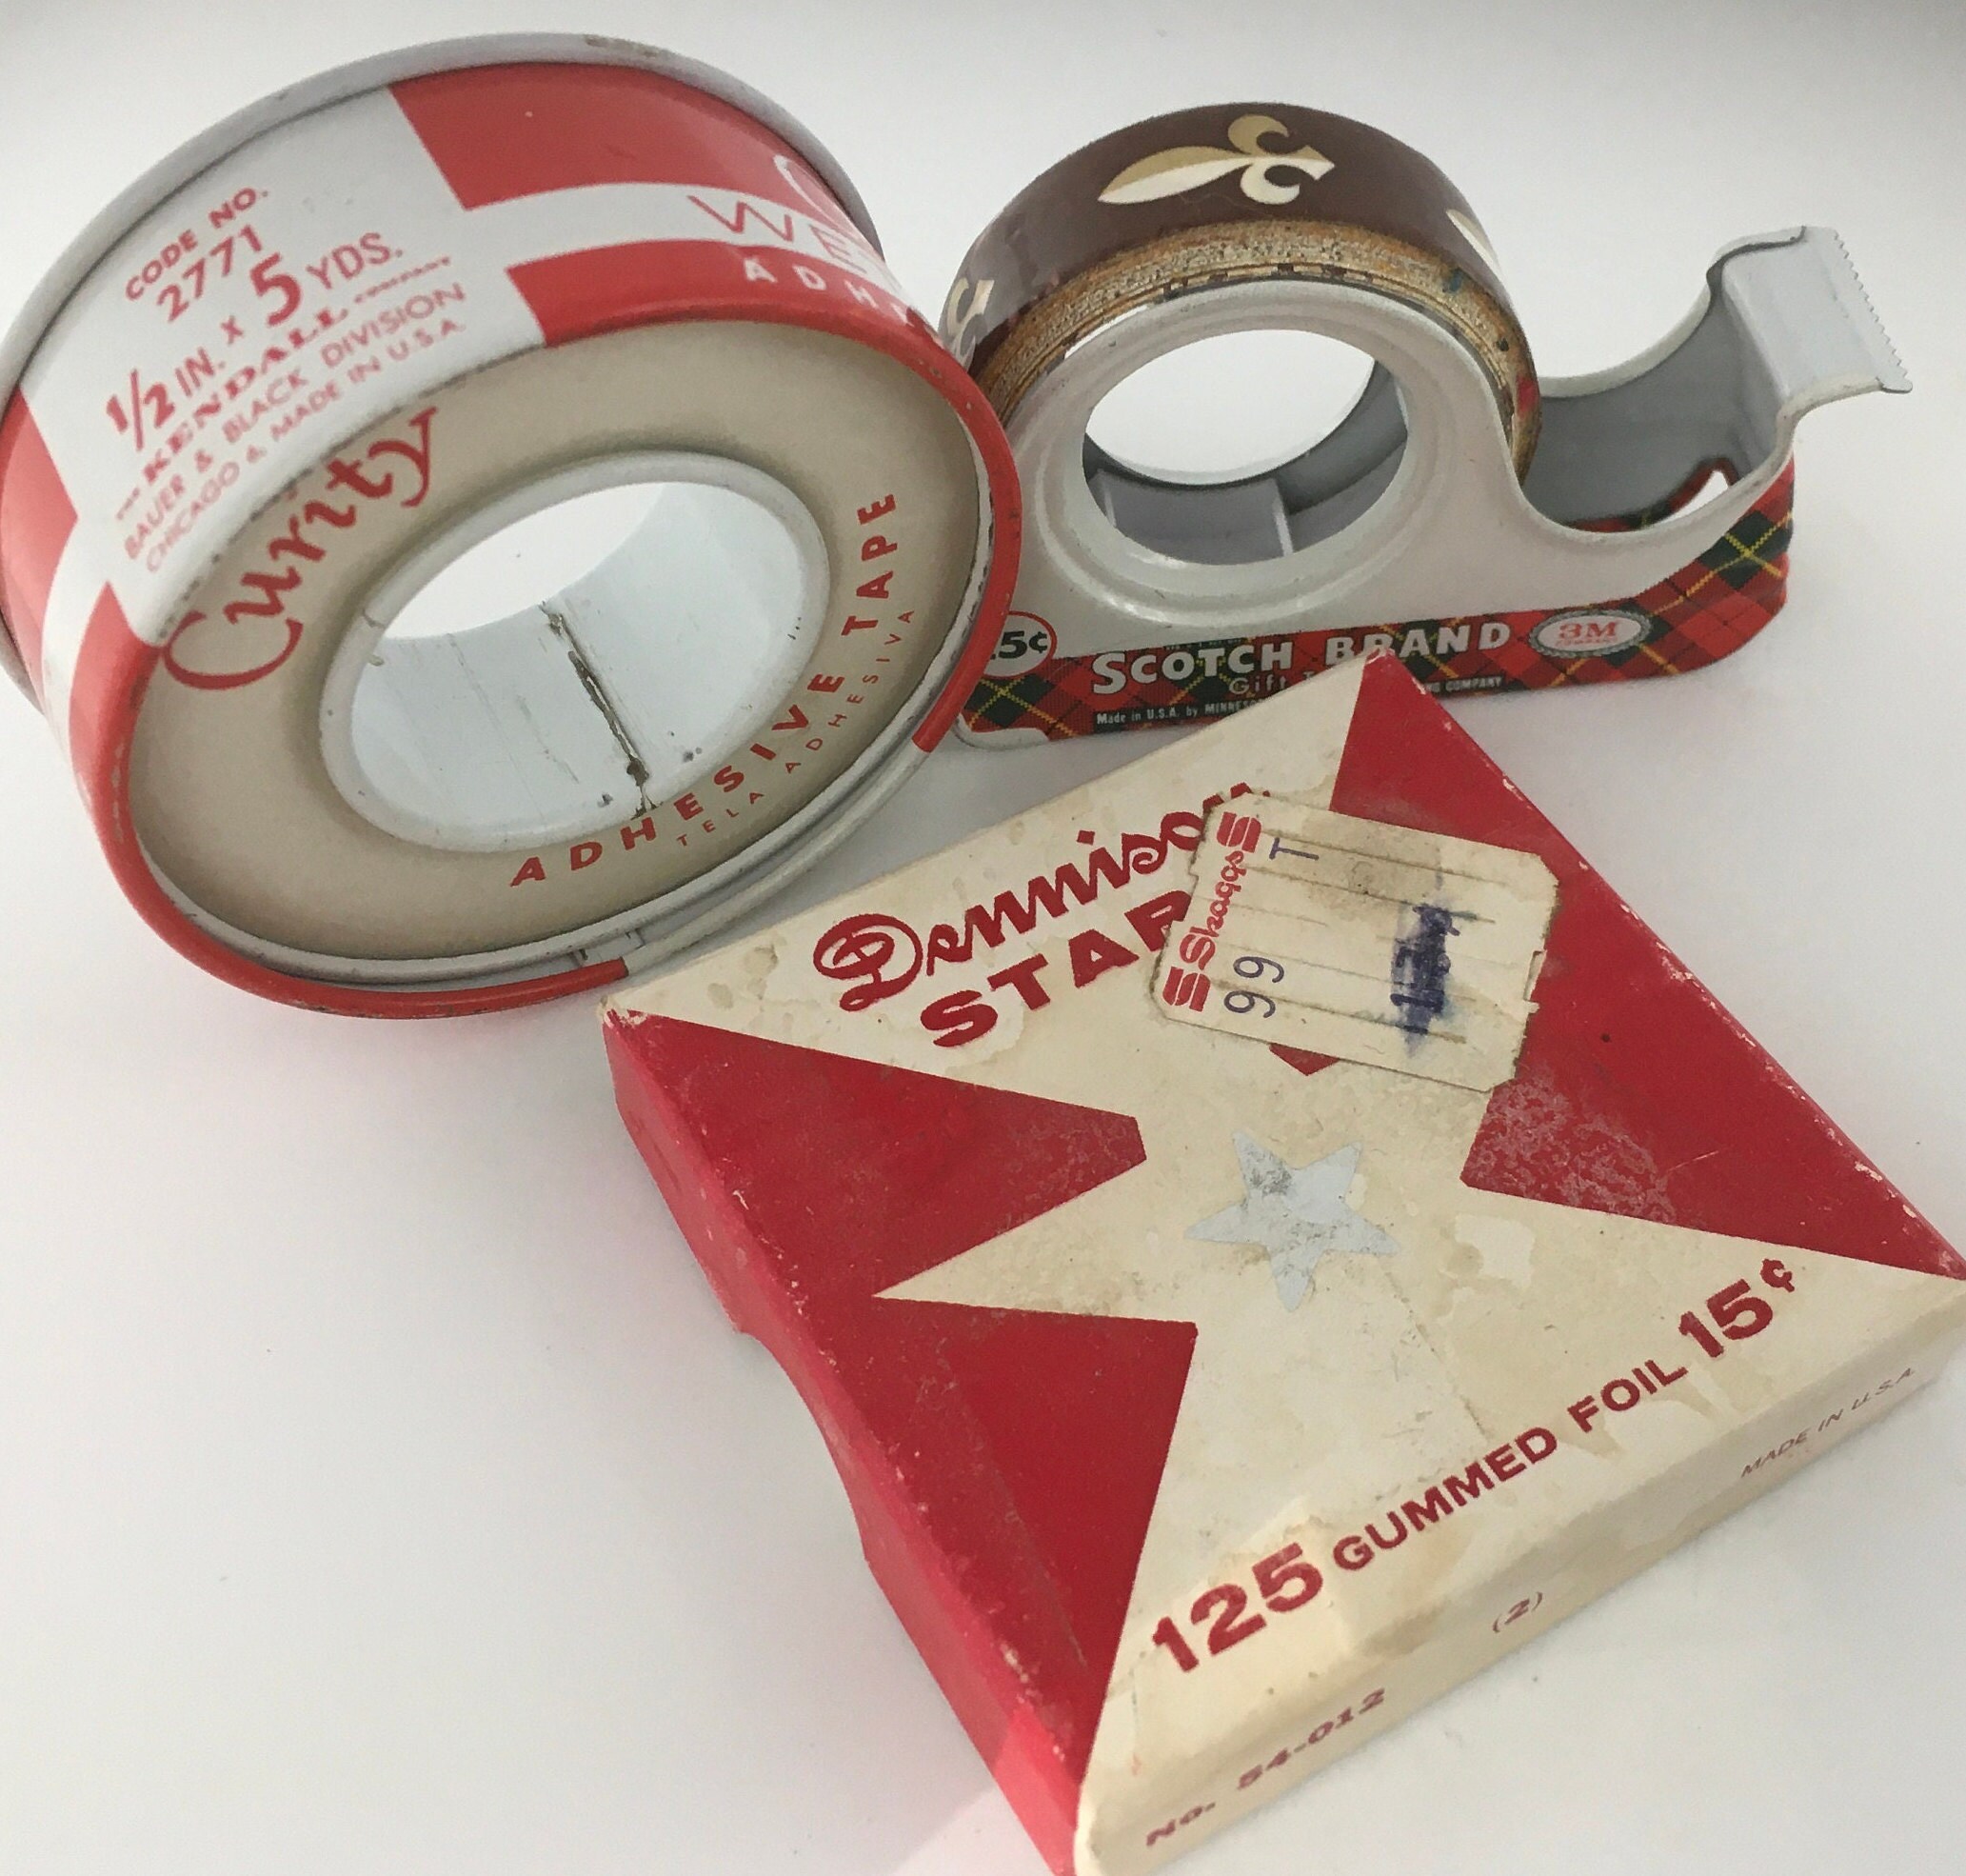 Vintage Scotch Brand double sided Tape Metal Tin Dispenser With Tape 3M